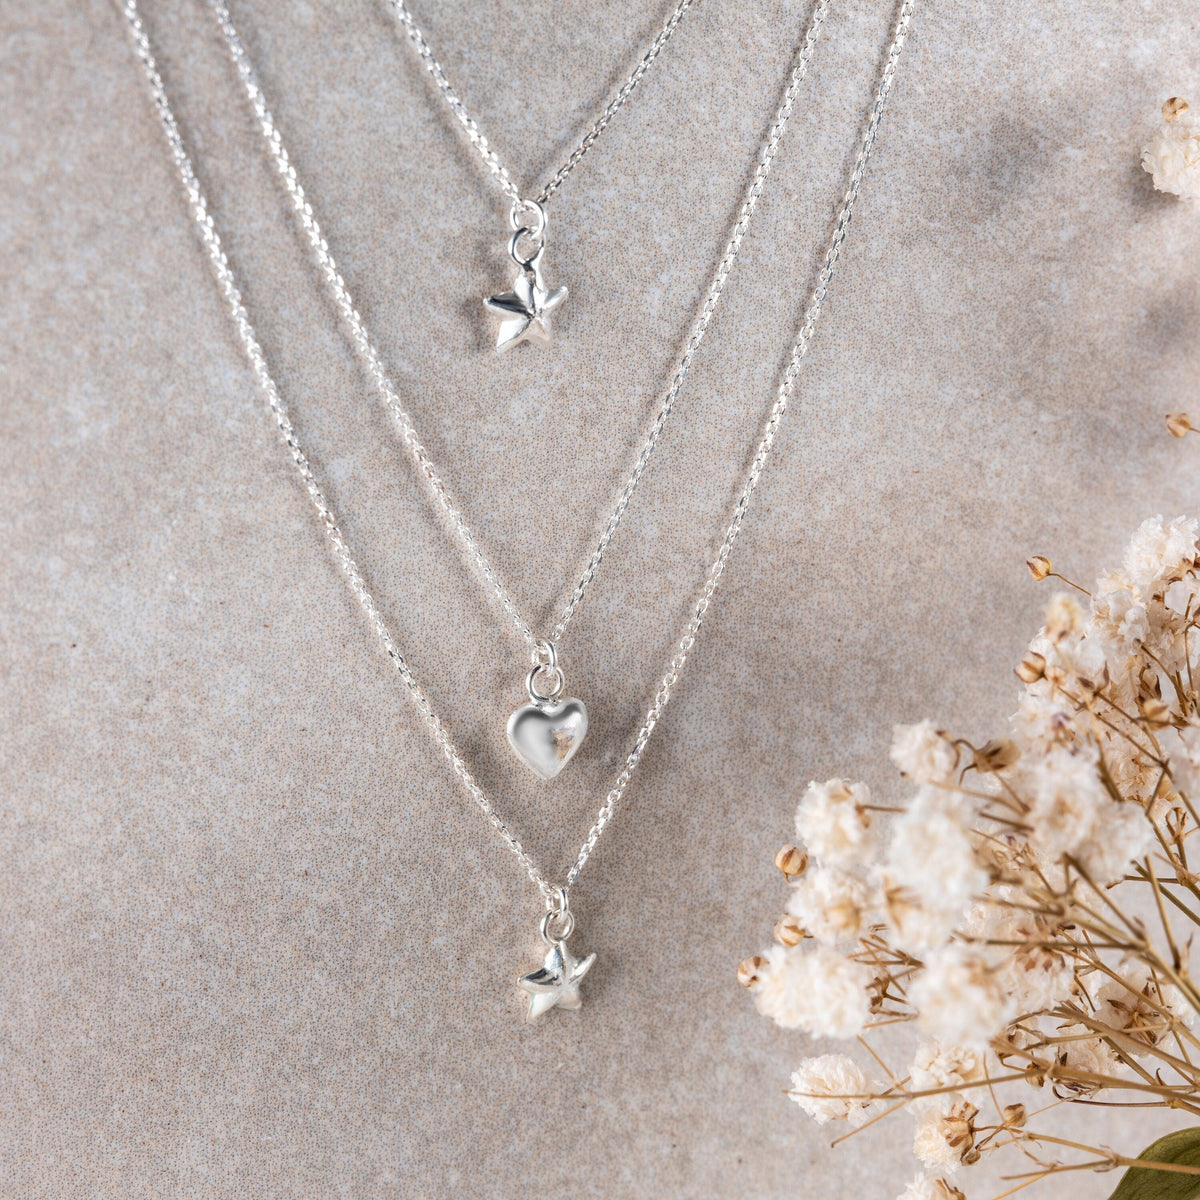 3 Layer Necklaces with Star and Heart Charms